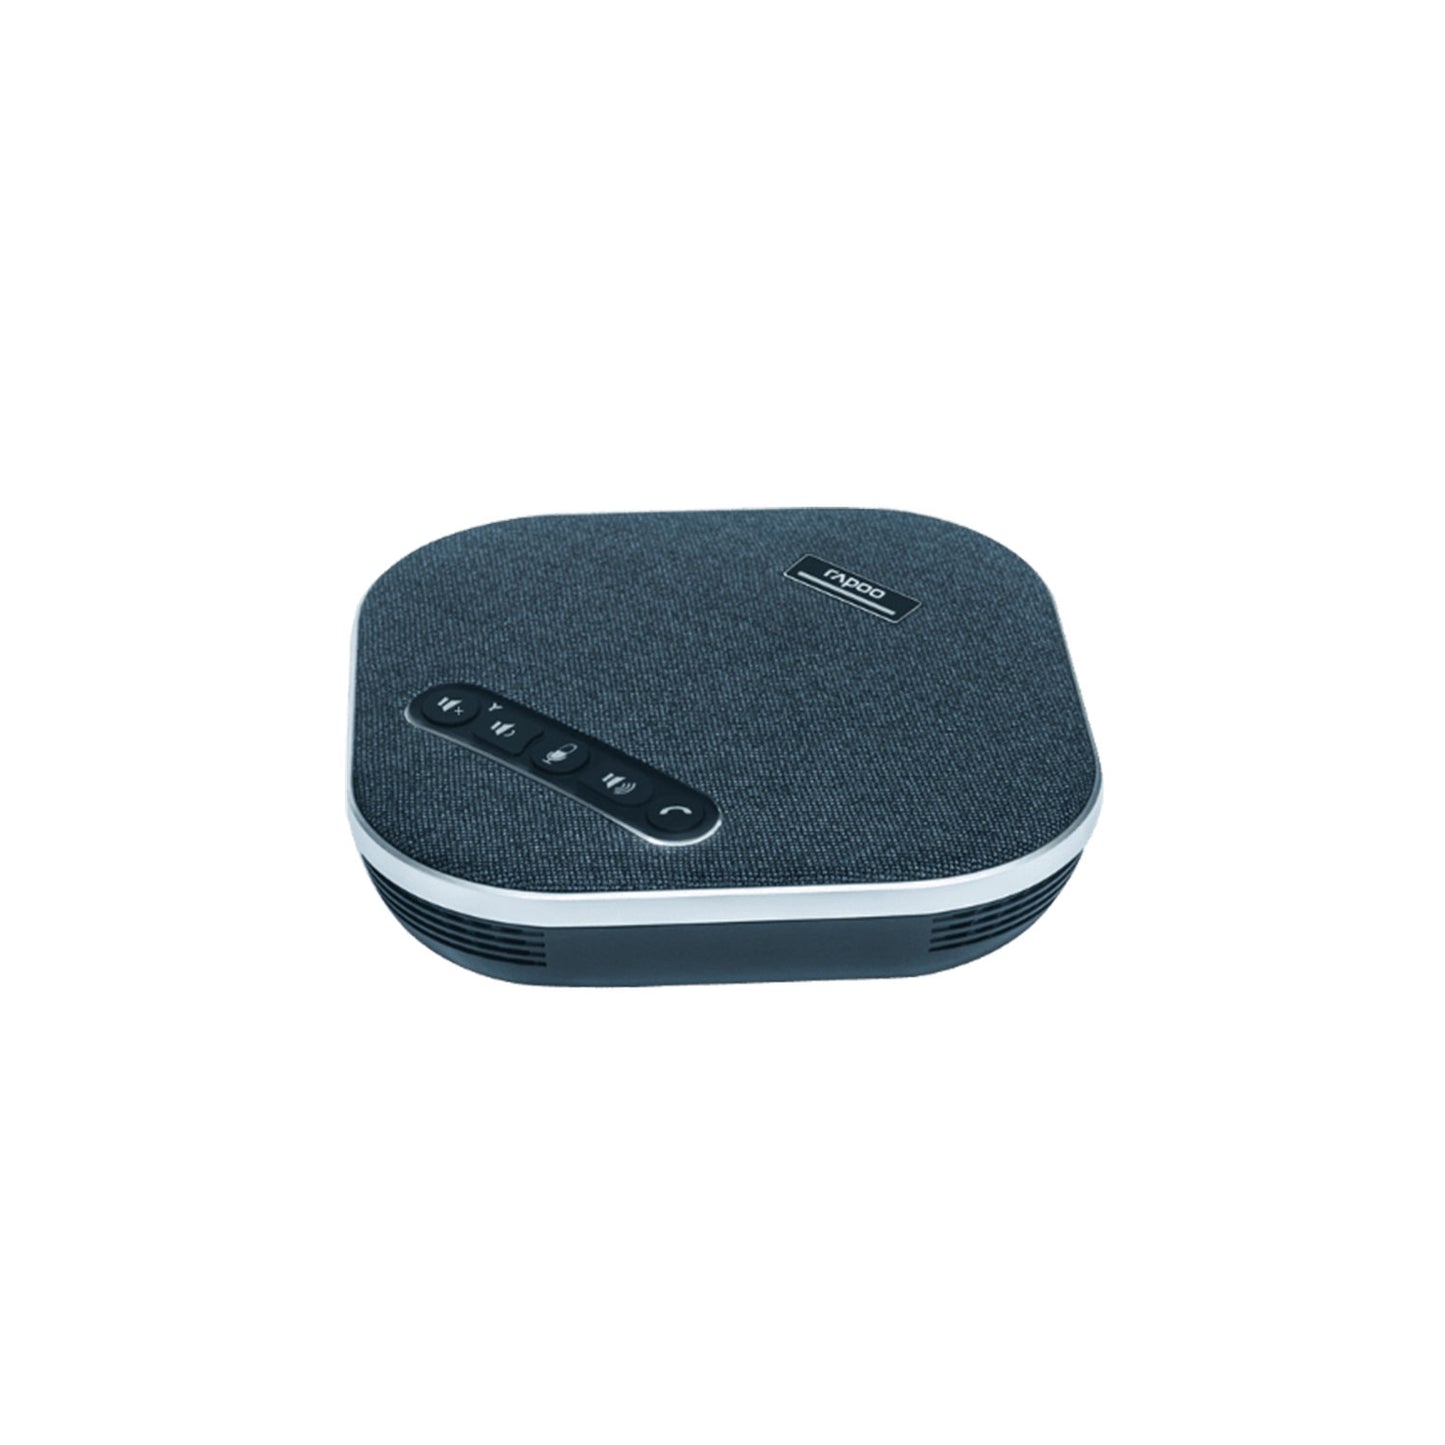 Rapoo CM600 USB Omnidirectional SpeakerPhone For Conference Room and Meeting Room, 5-8M 360 degrees pickup radios for Zoom/Skype/Teams, Conferencing and Video Calls